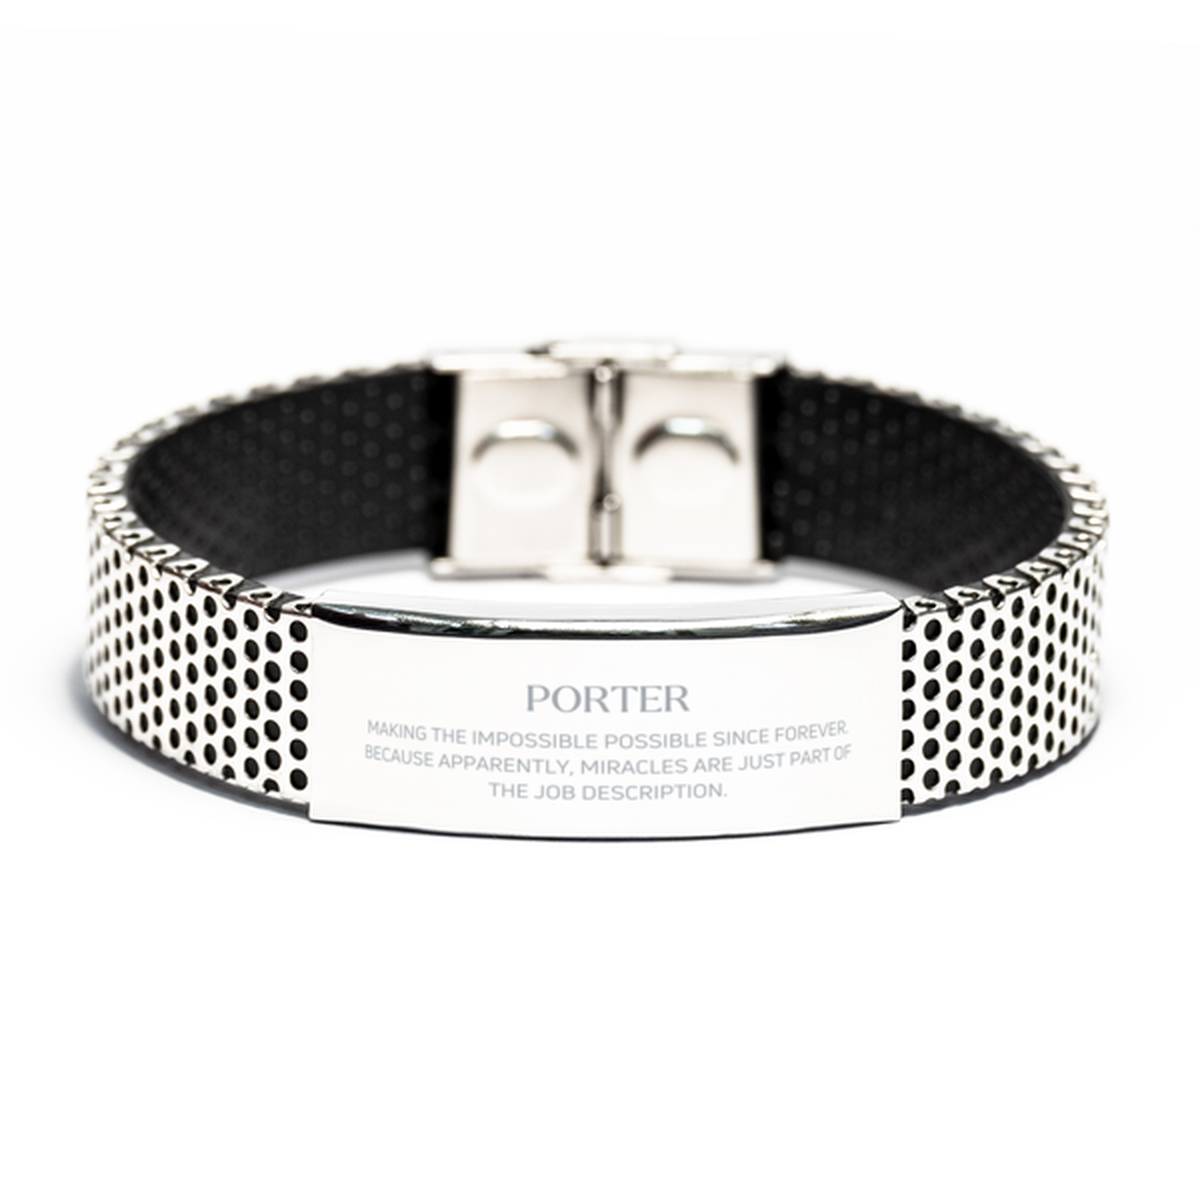 Funny Porter Gifts, Miracles are just part of the job description, Inspirational Birthday Stainless Steel Bracelet For Porter, Men, Women, Coworkers, Friends, Boss